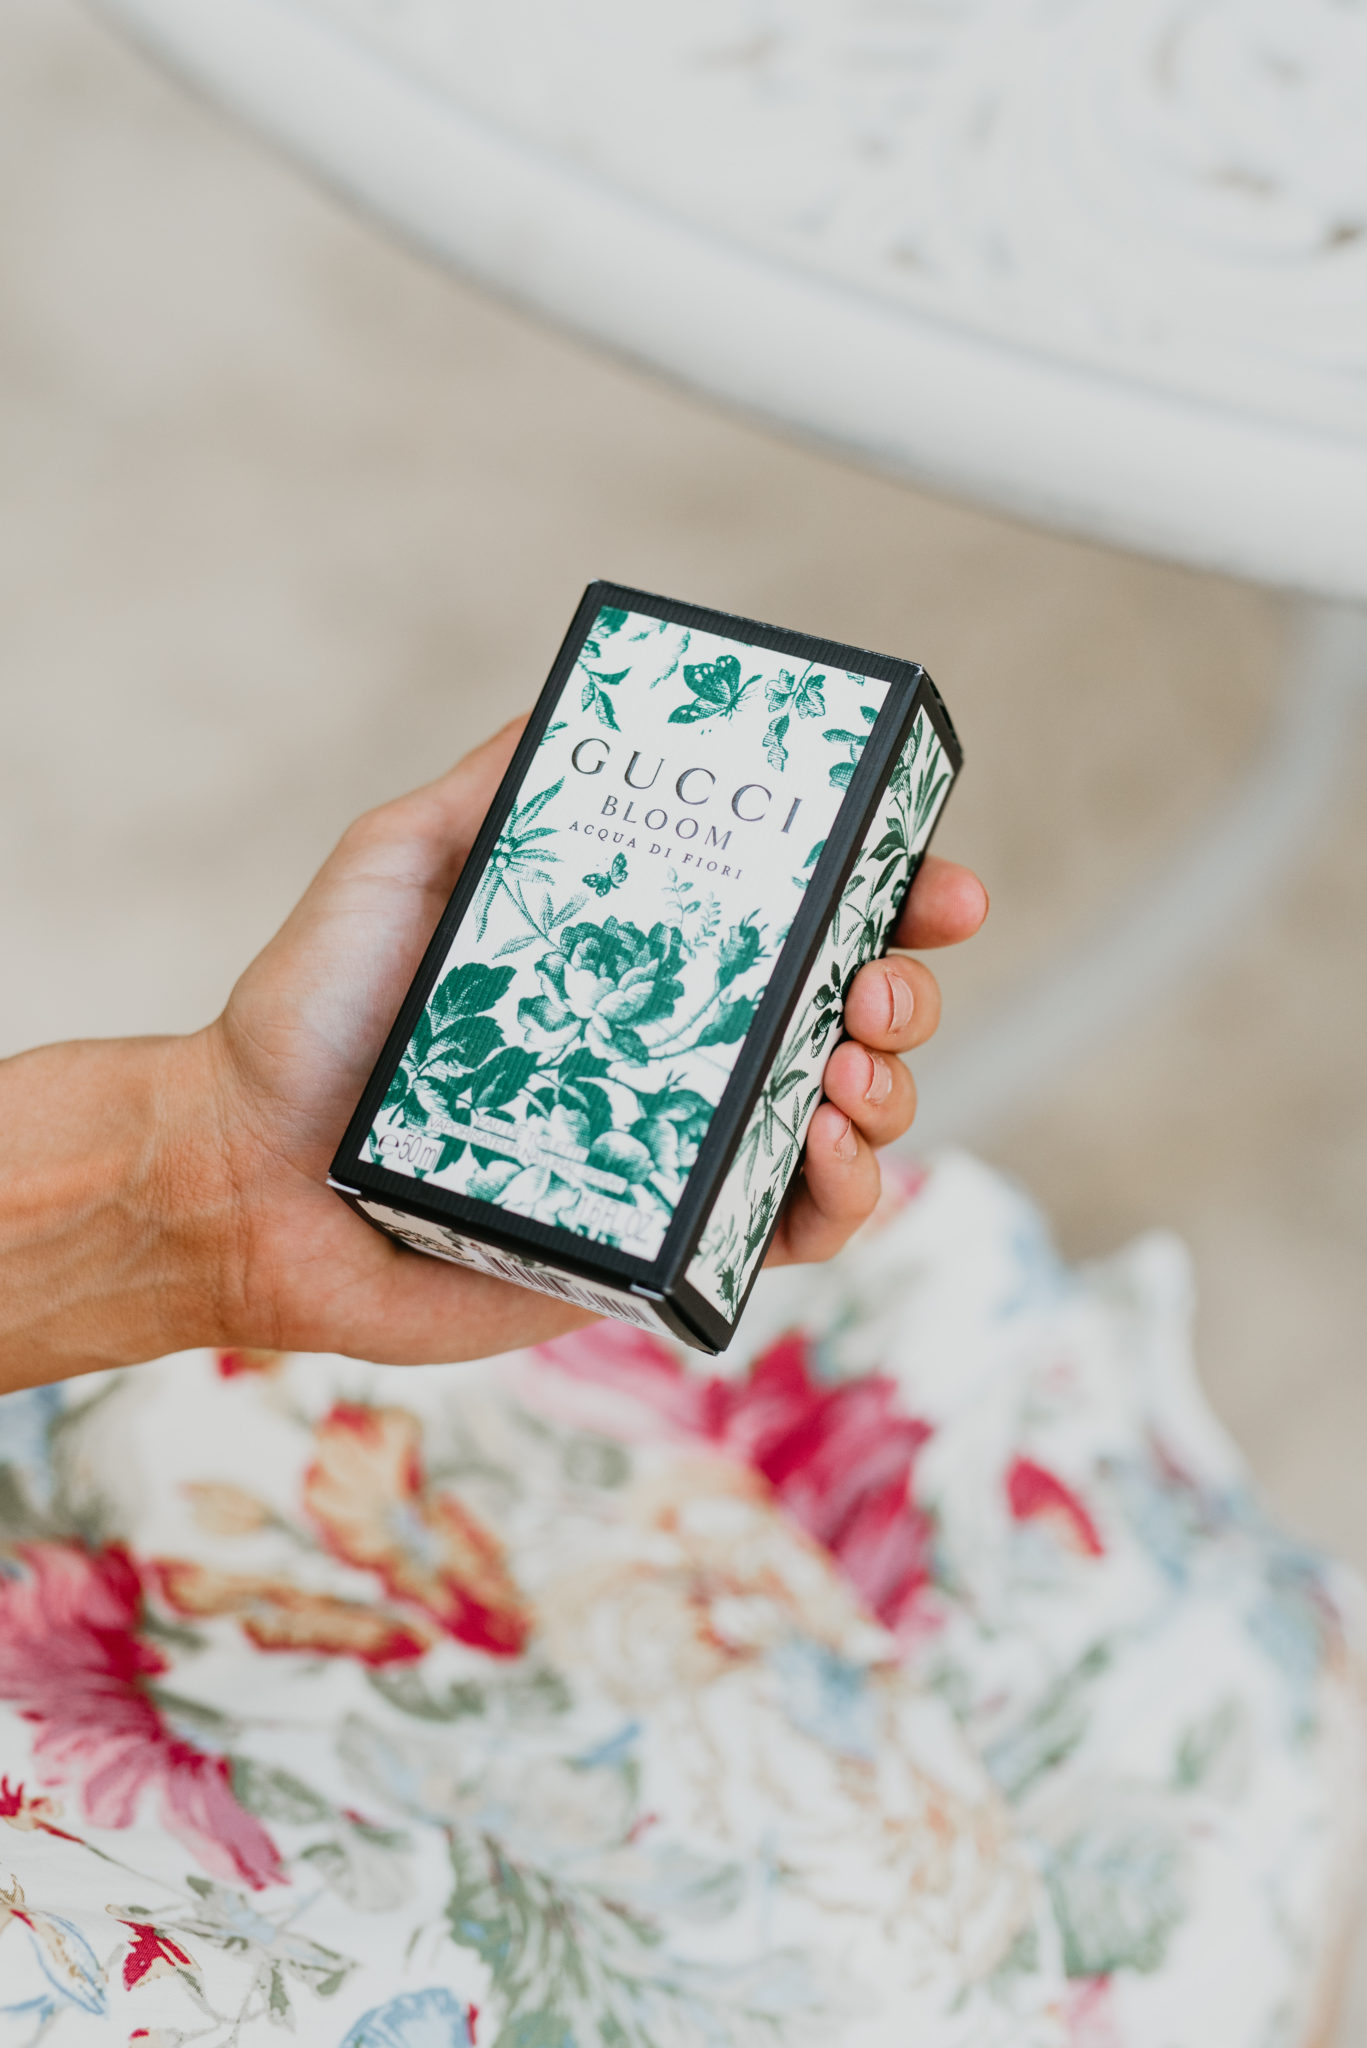 Unique Mothers Day Gift Idea featured by top US life and style blog, Outfits & Outings: image of a woman holding the GUCCI in Bloom Acqua di Fiore fragrance